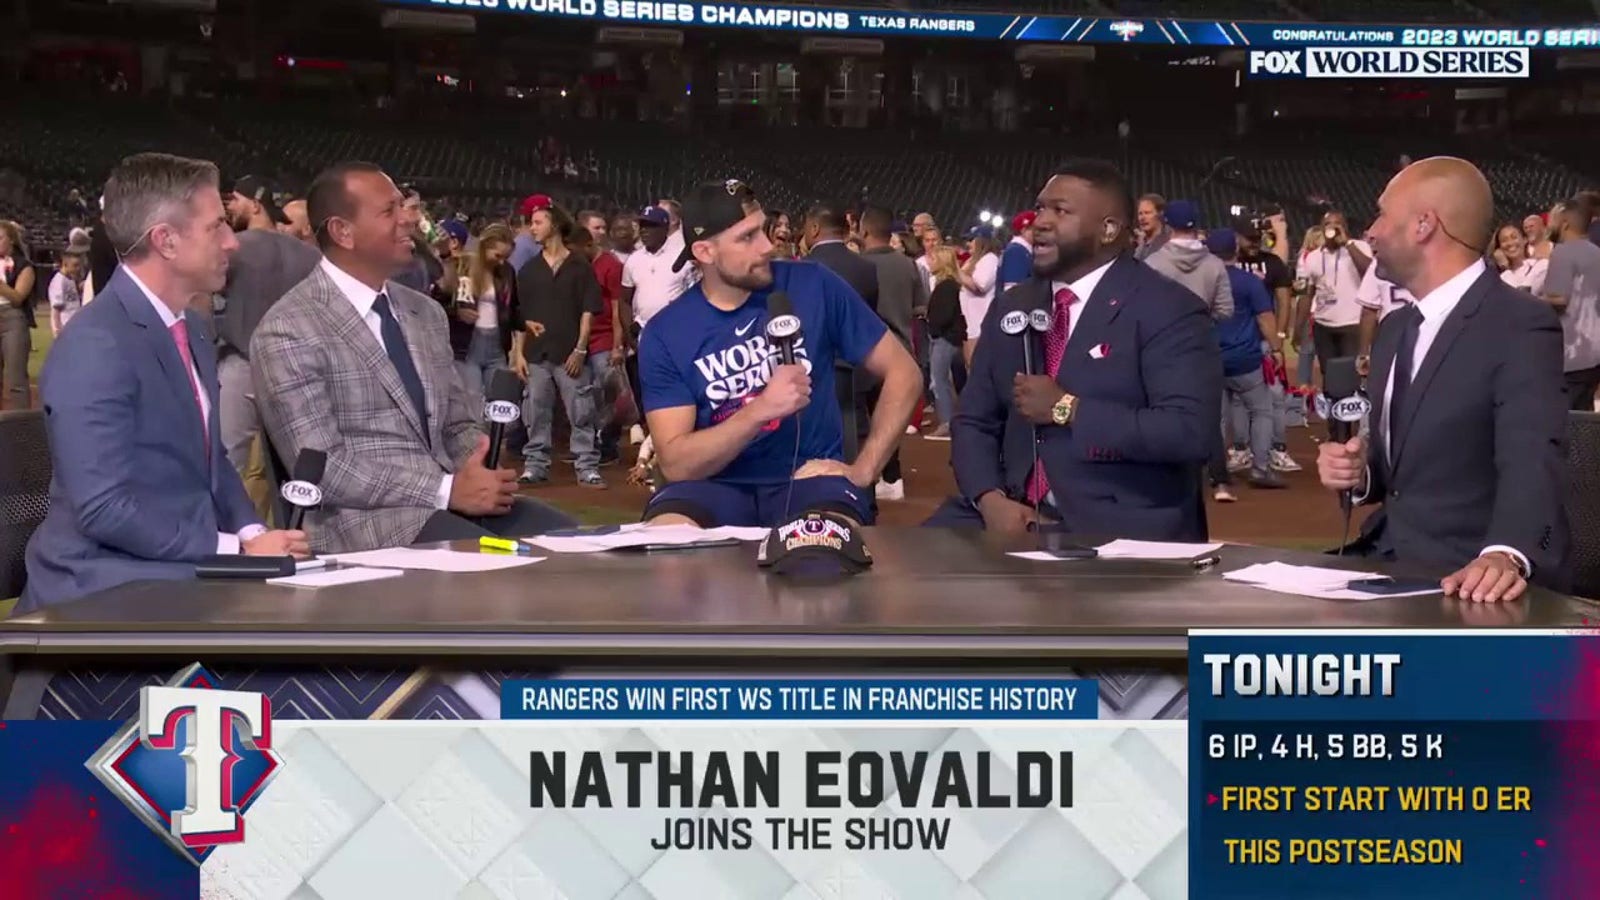 'I want to be one of the best' – Nathan Eovaldi reflects on winning five postseason starts with the Rangers